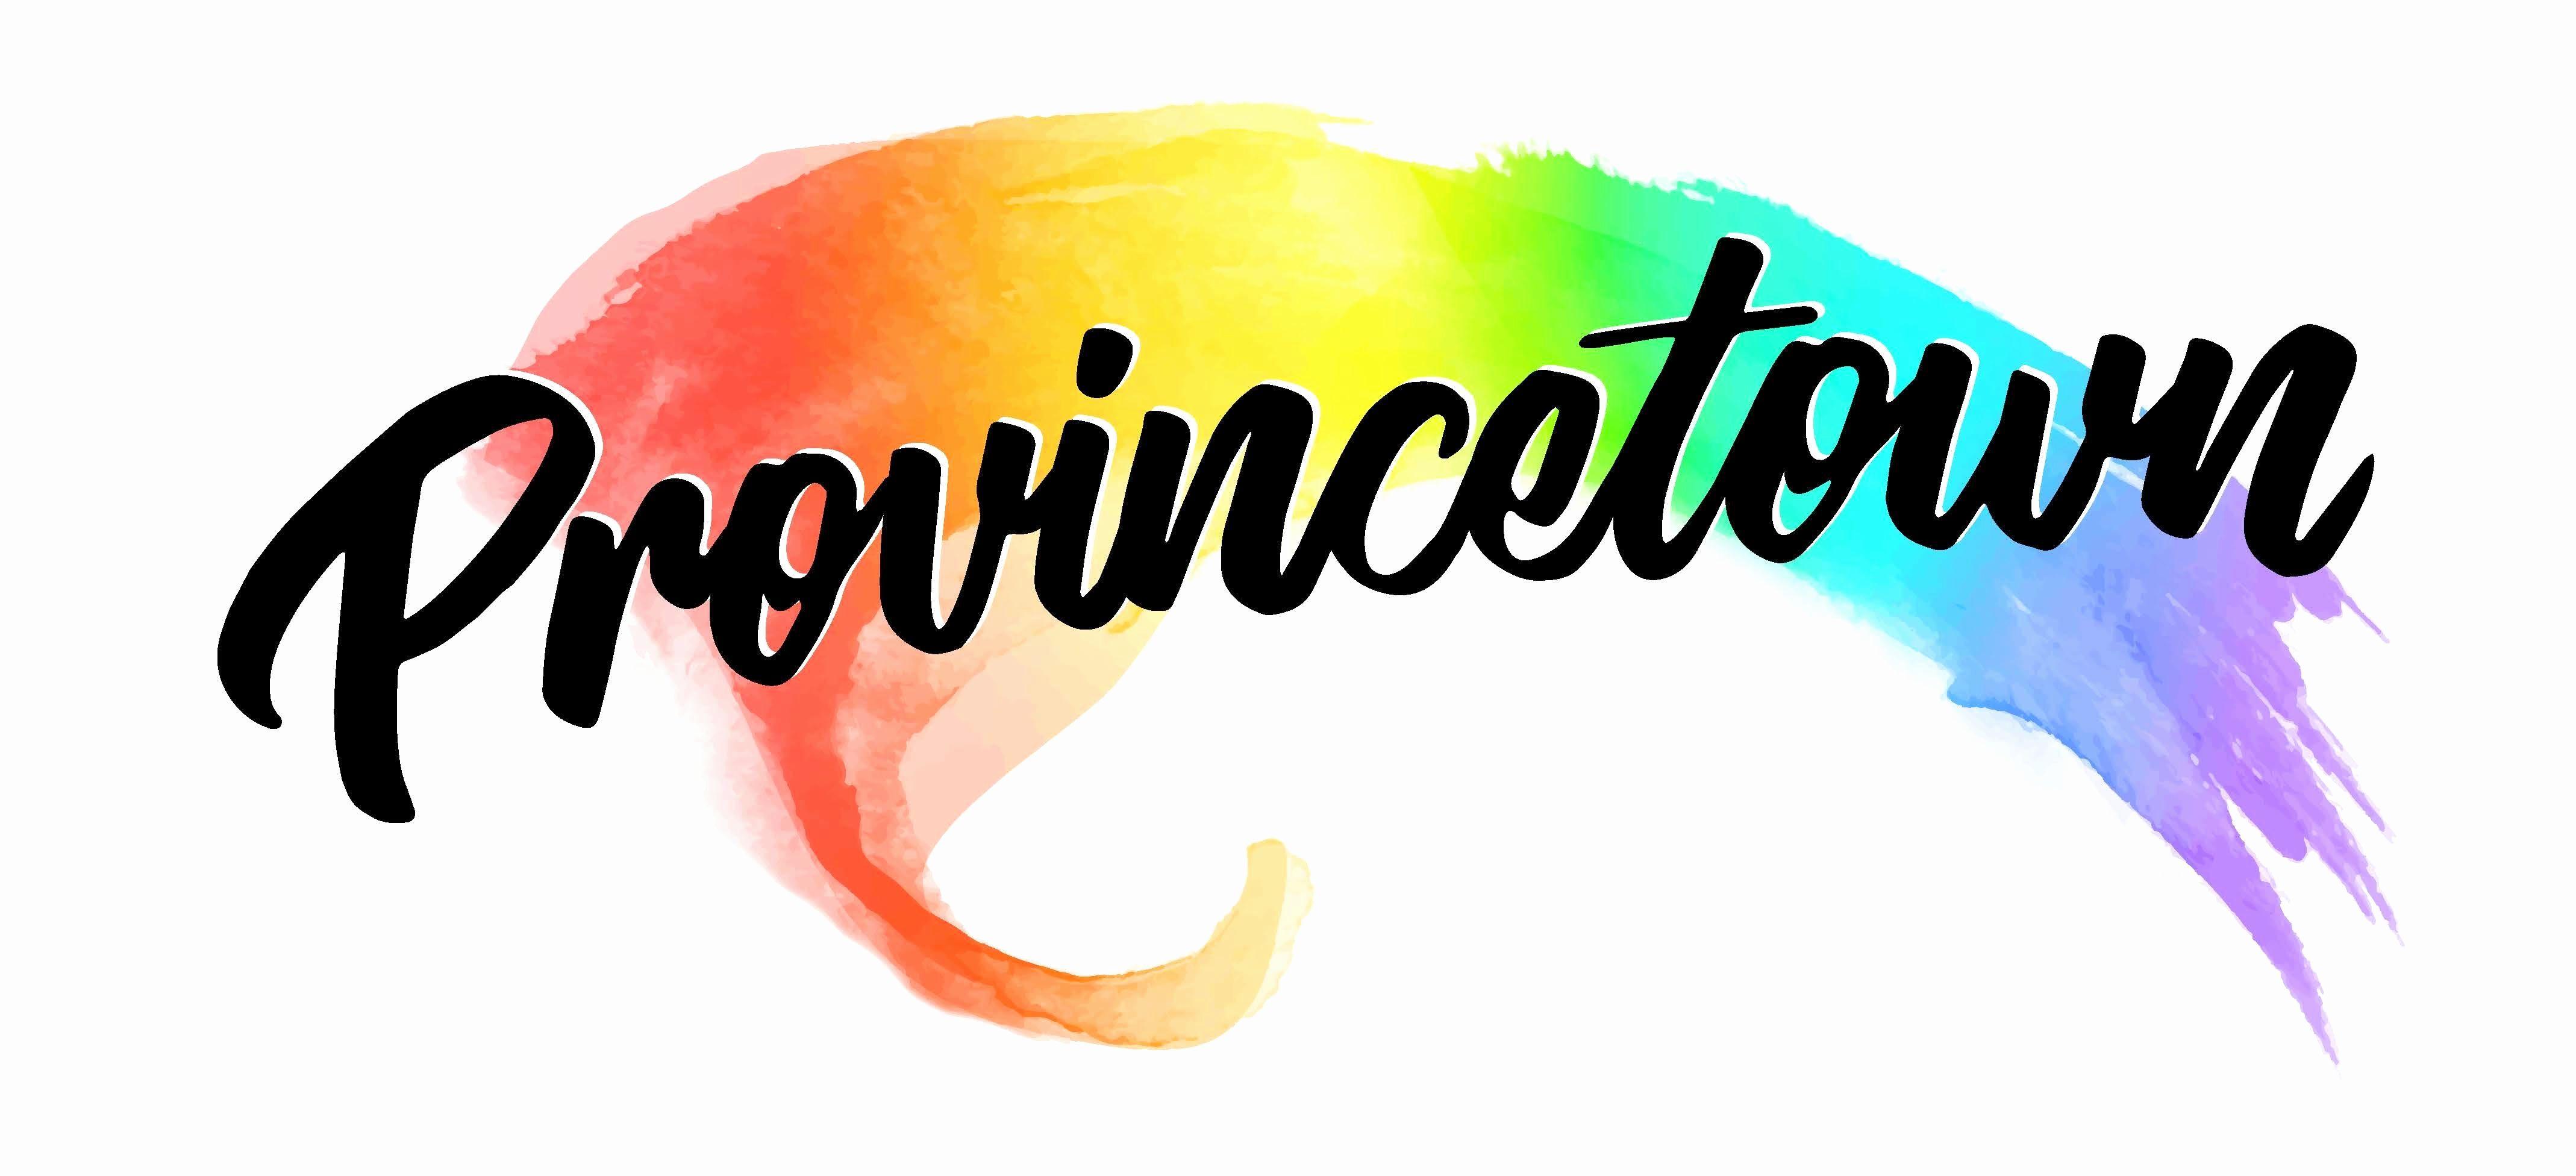 Rainbow Banner Logo - Provincetown Banner Wicked Local Best Of Rainbow Logo Seen as